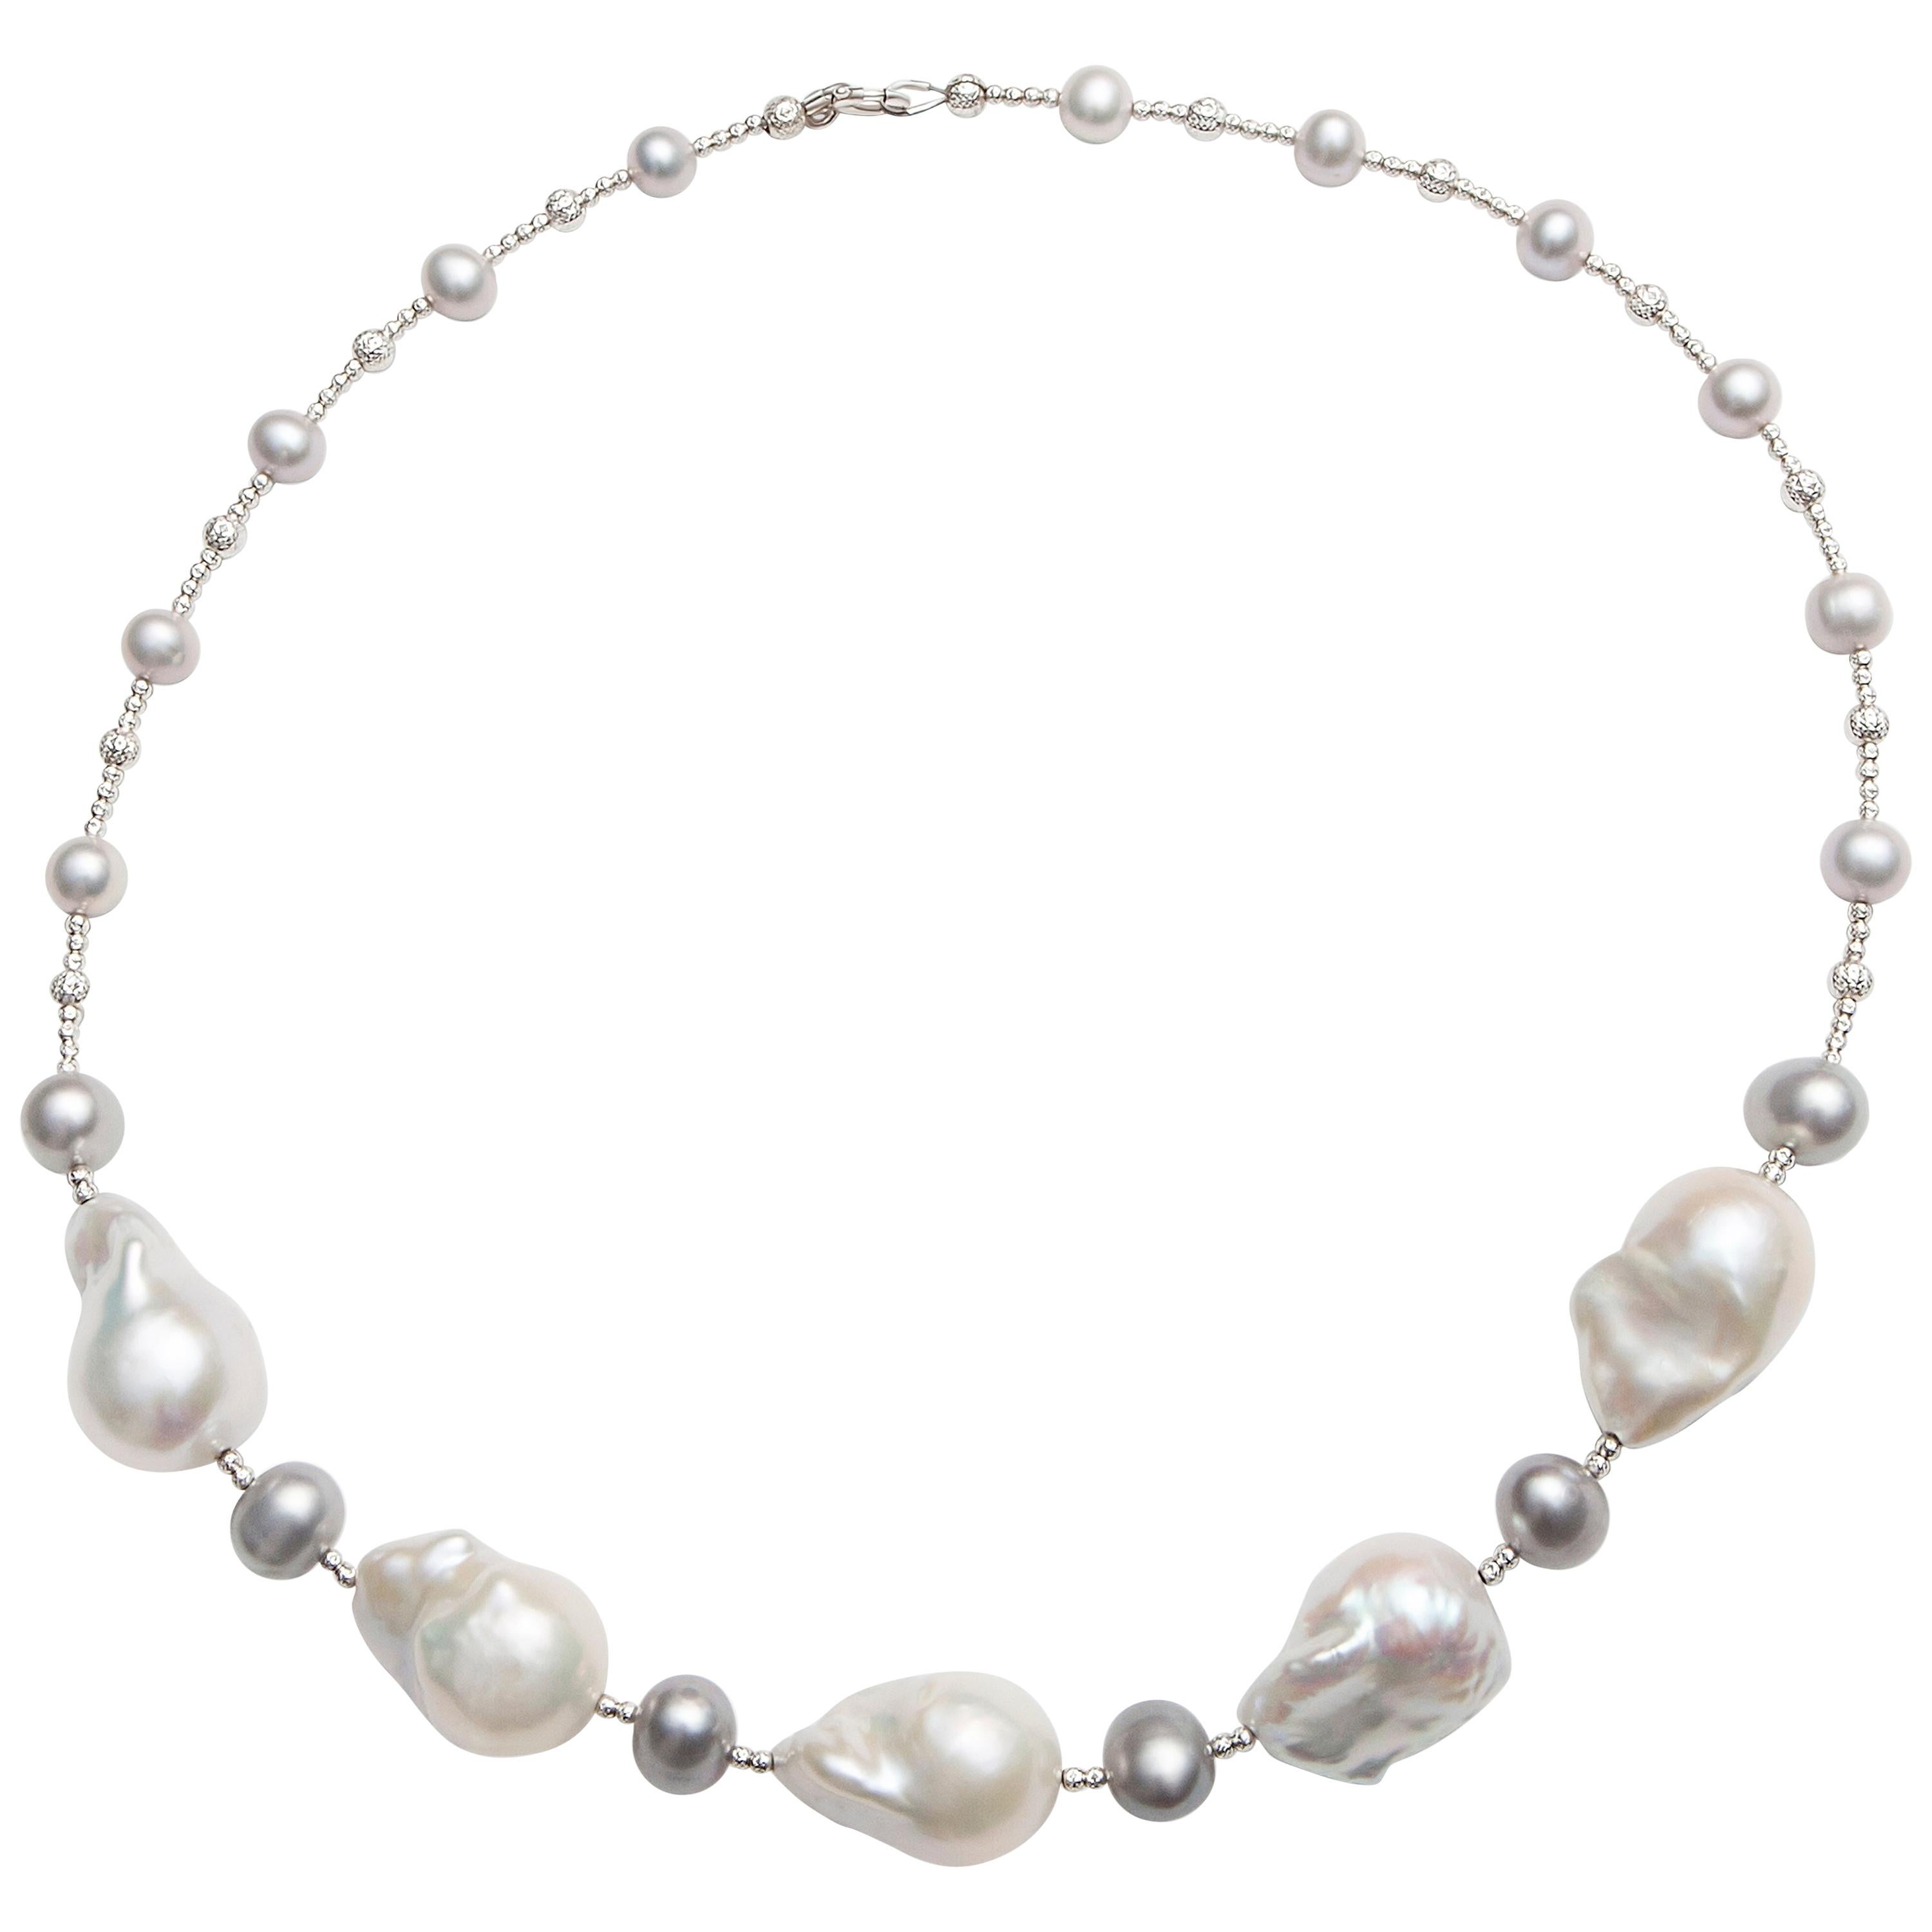 Grey Pearl Necklace with Five White Baroque Pearls and Diamond Cut Beads For Sale